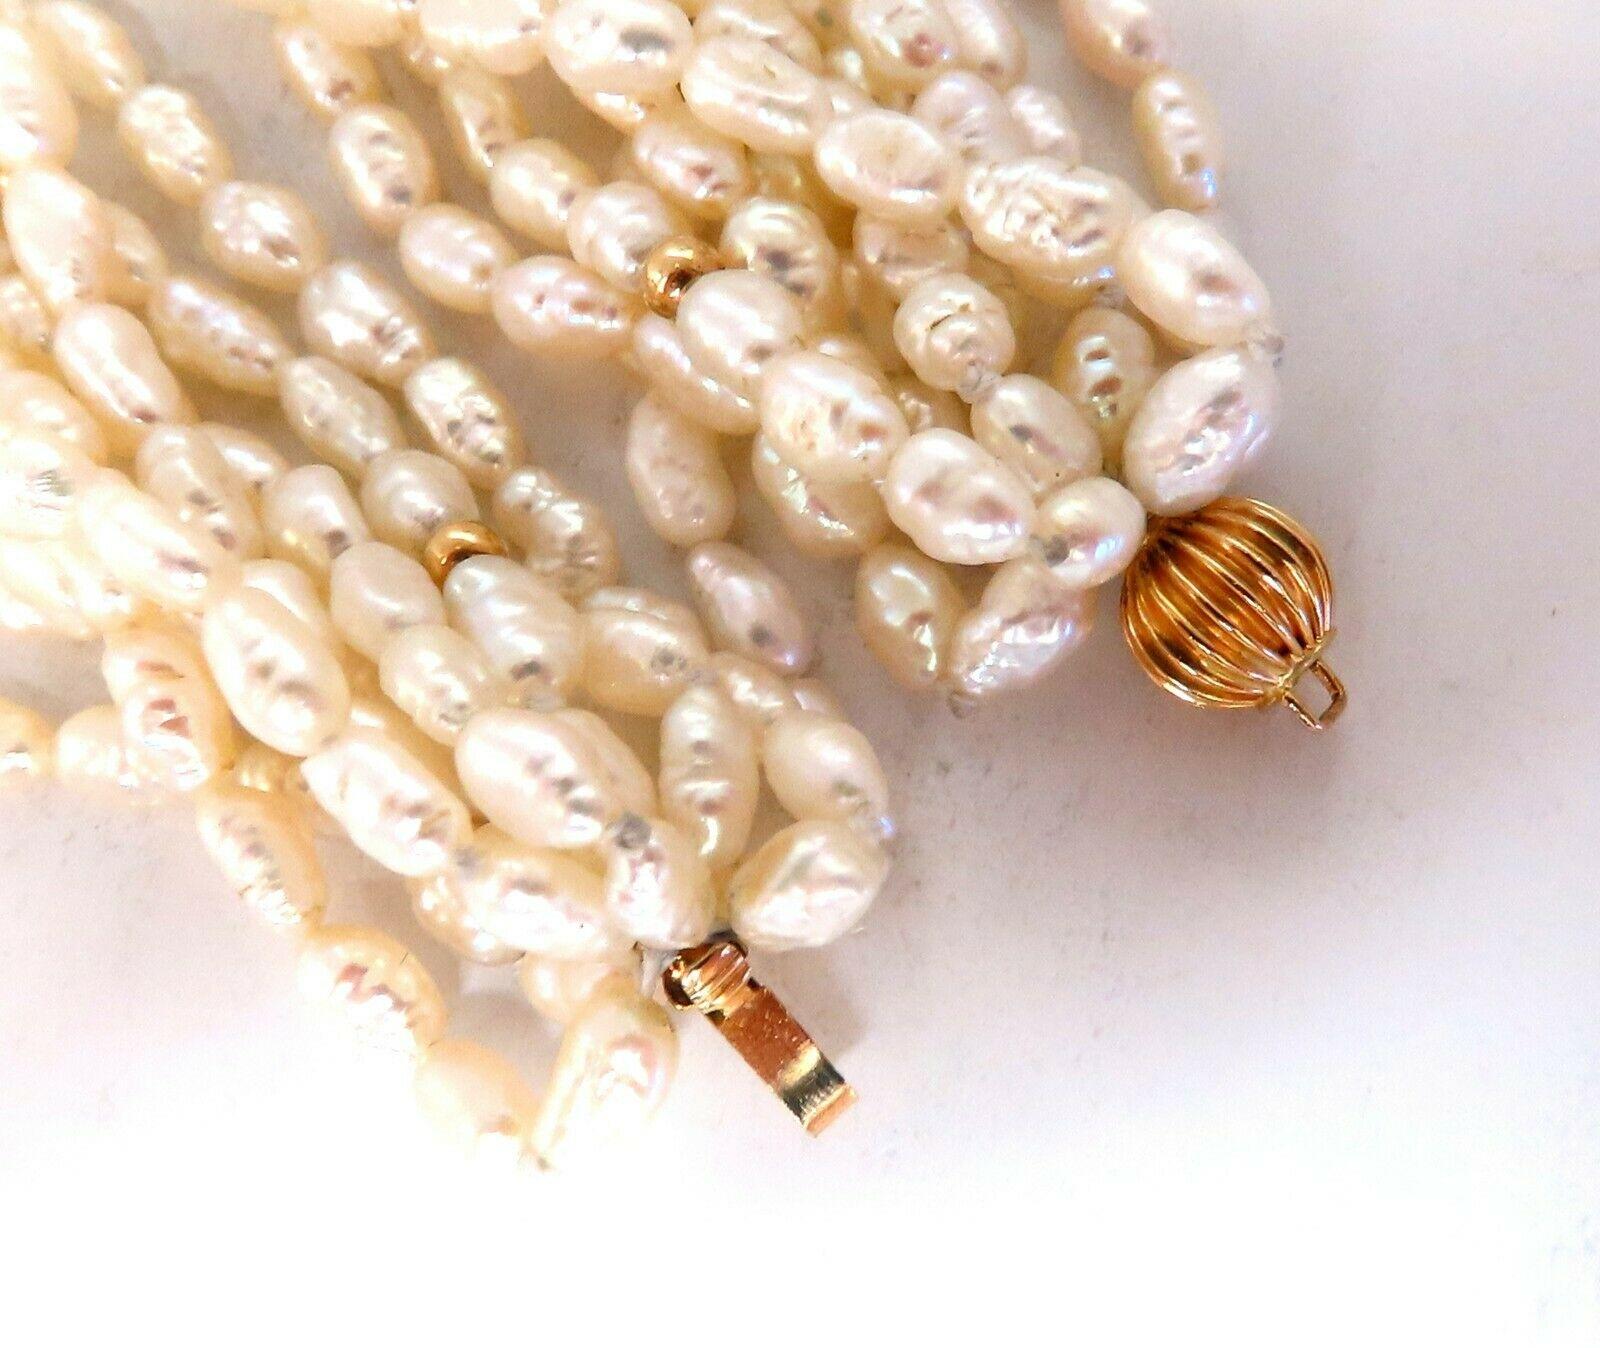 10 Stranded Rice / Fresh Water Pearls Necklace.

Off white Light Irish Cream
Necklace: 26 inch long.

14kt Yellow Gold

109.6 Grams.